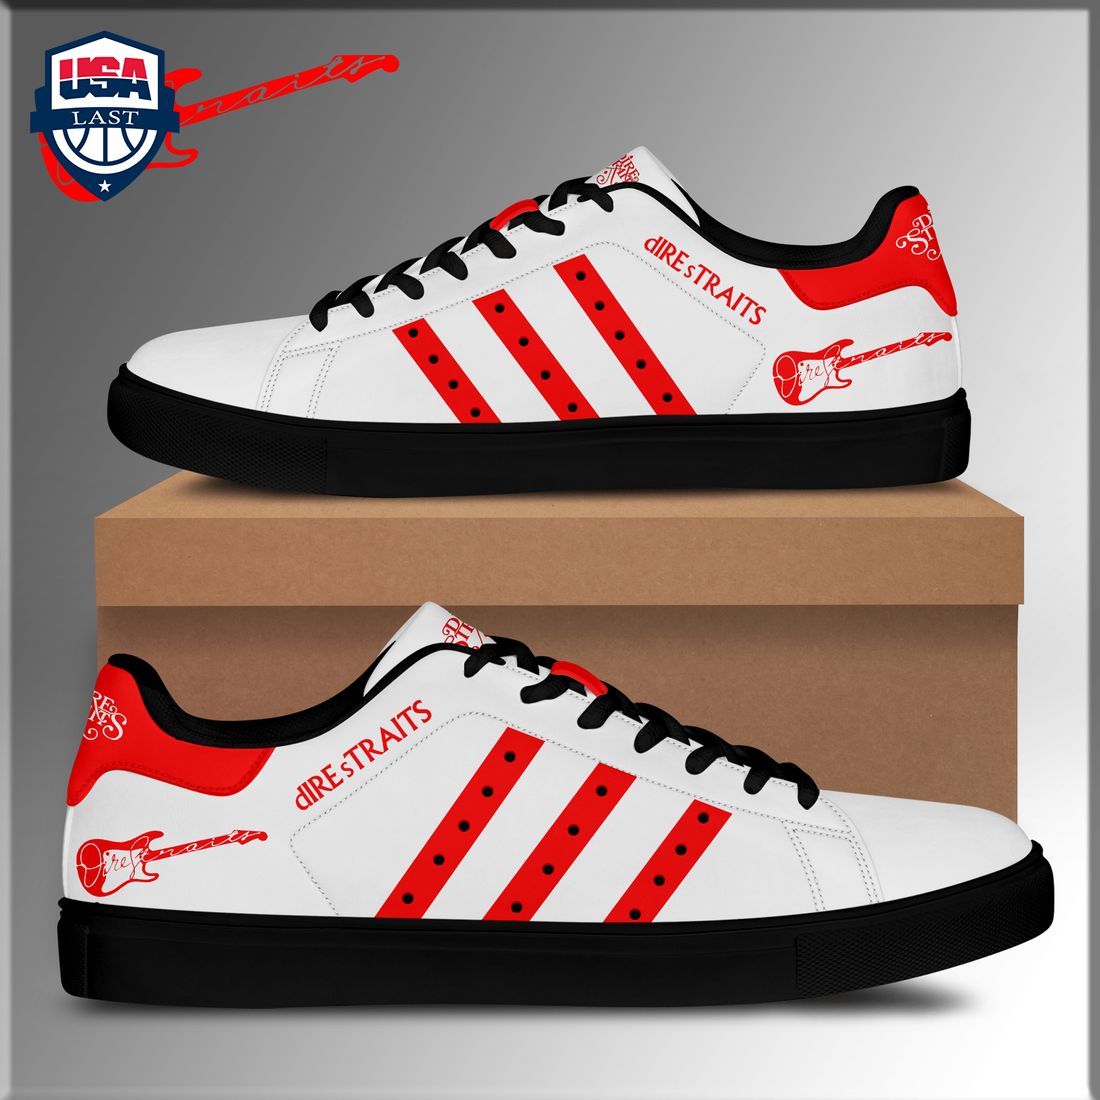 Dire Straits Red Stripes Style 1 Stan Smith Low Top Shoes - Handsome as usual